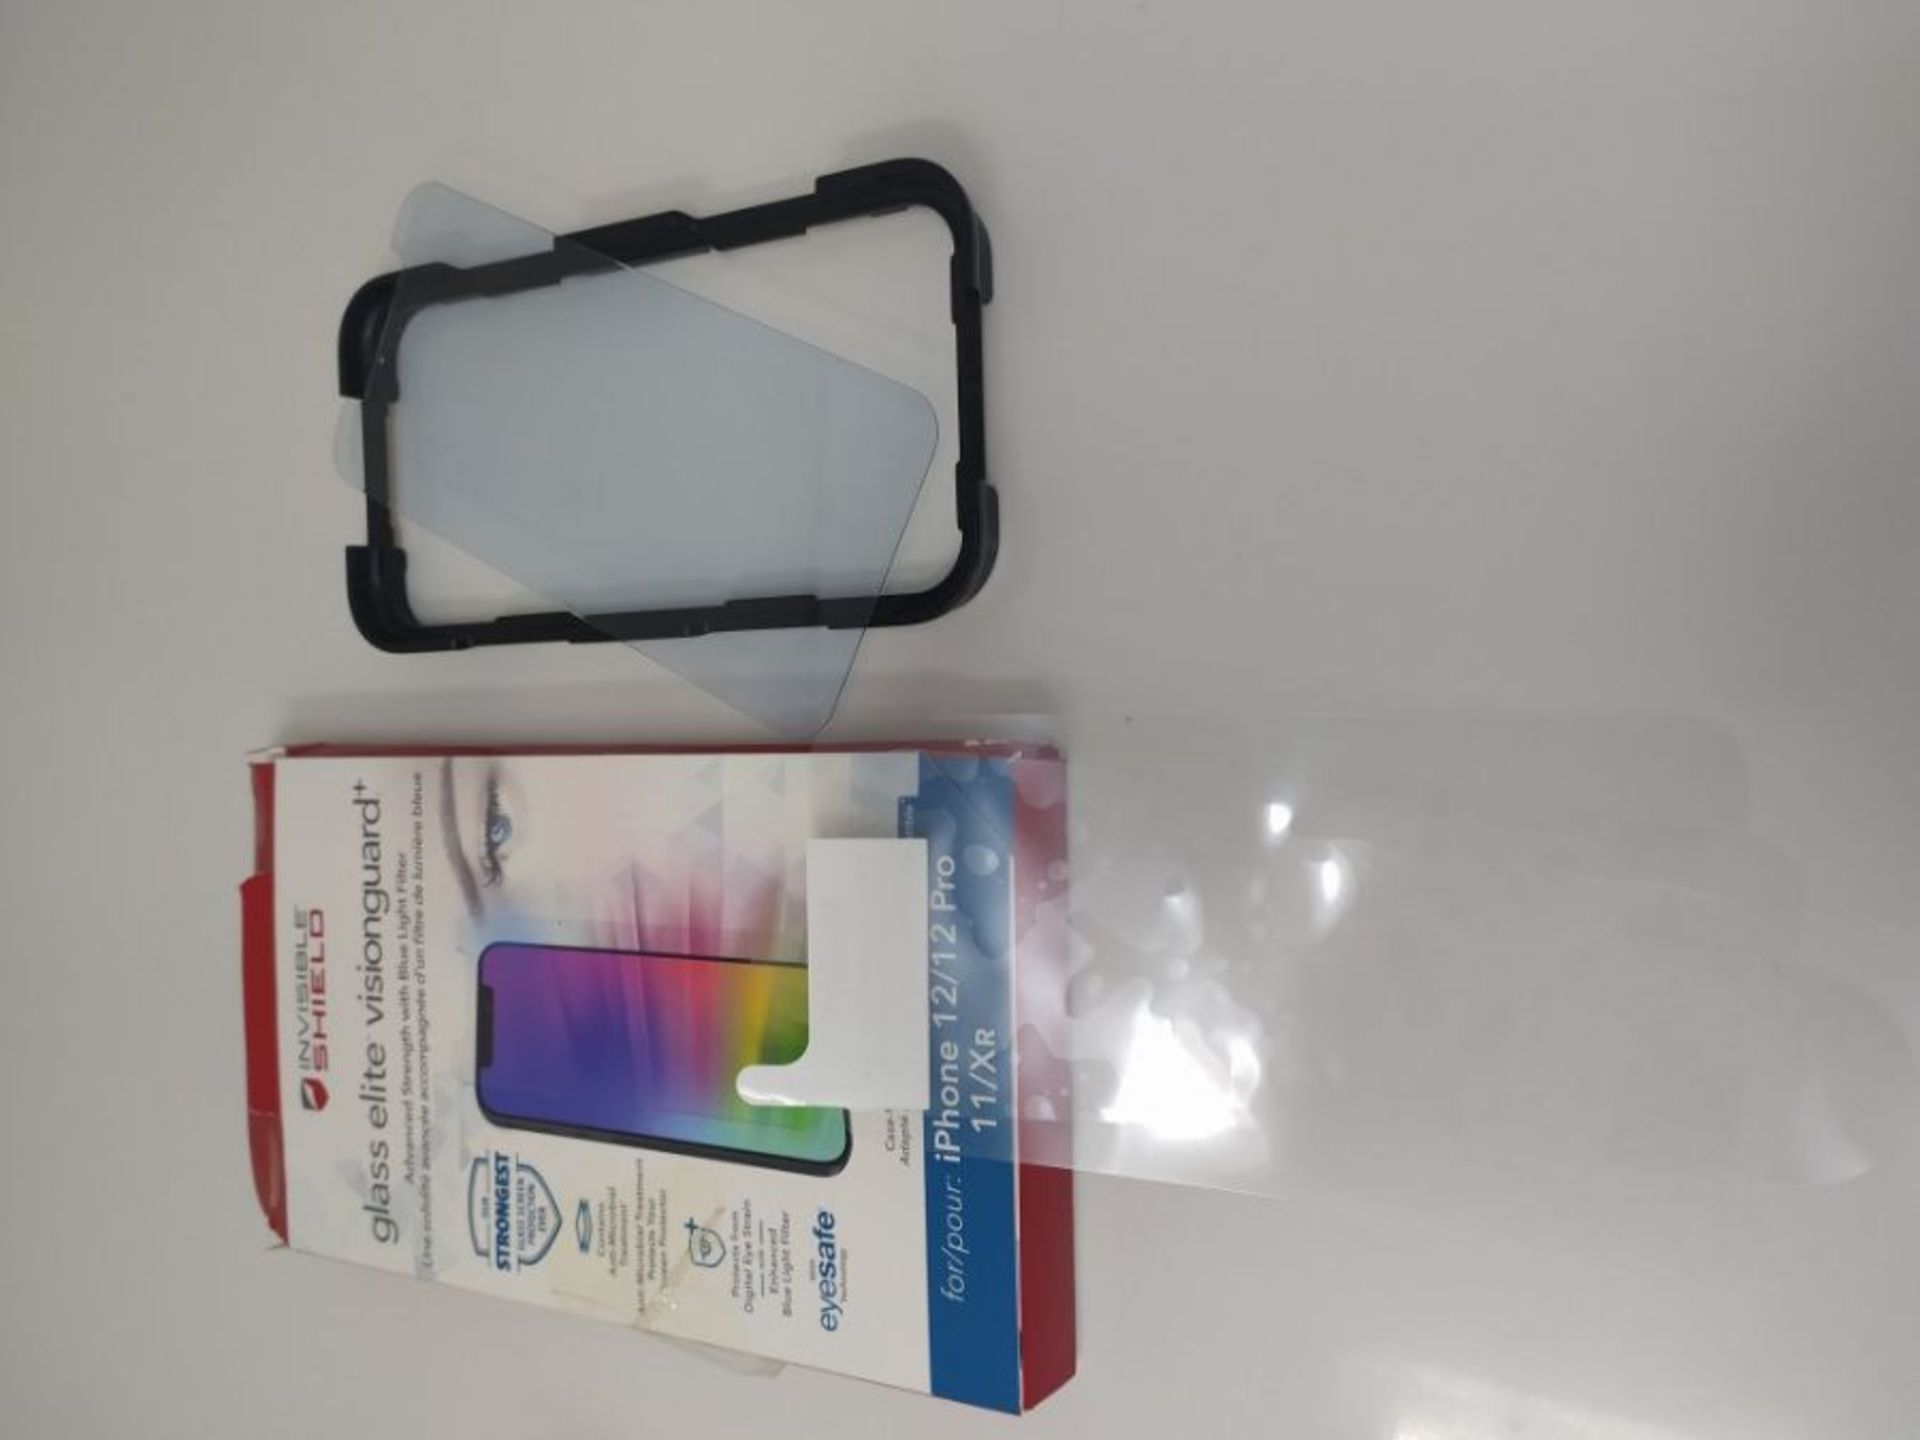 ZAGG - InvisibleShield Glass Elite VisionGuard Plus - Blue Light Filter for Apple iPho - Image 2 of 2